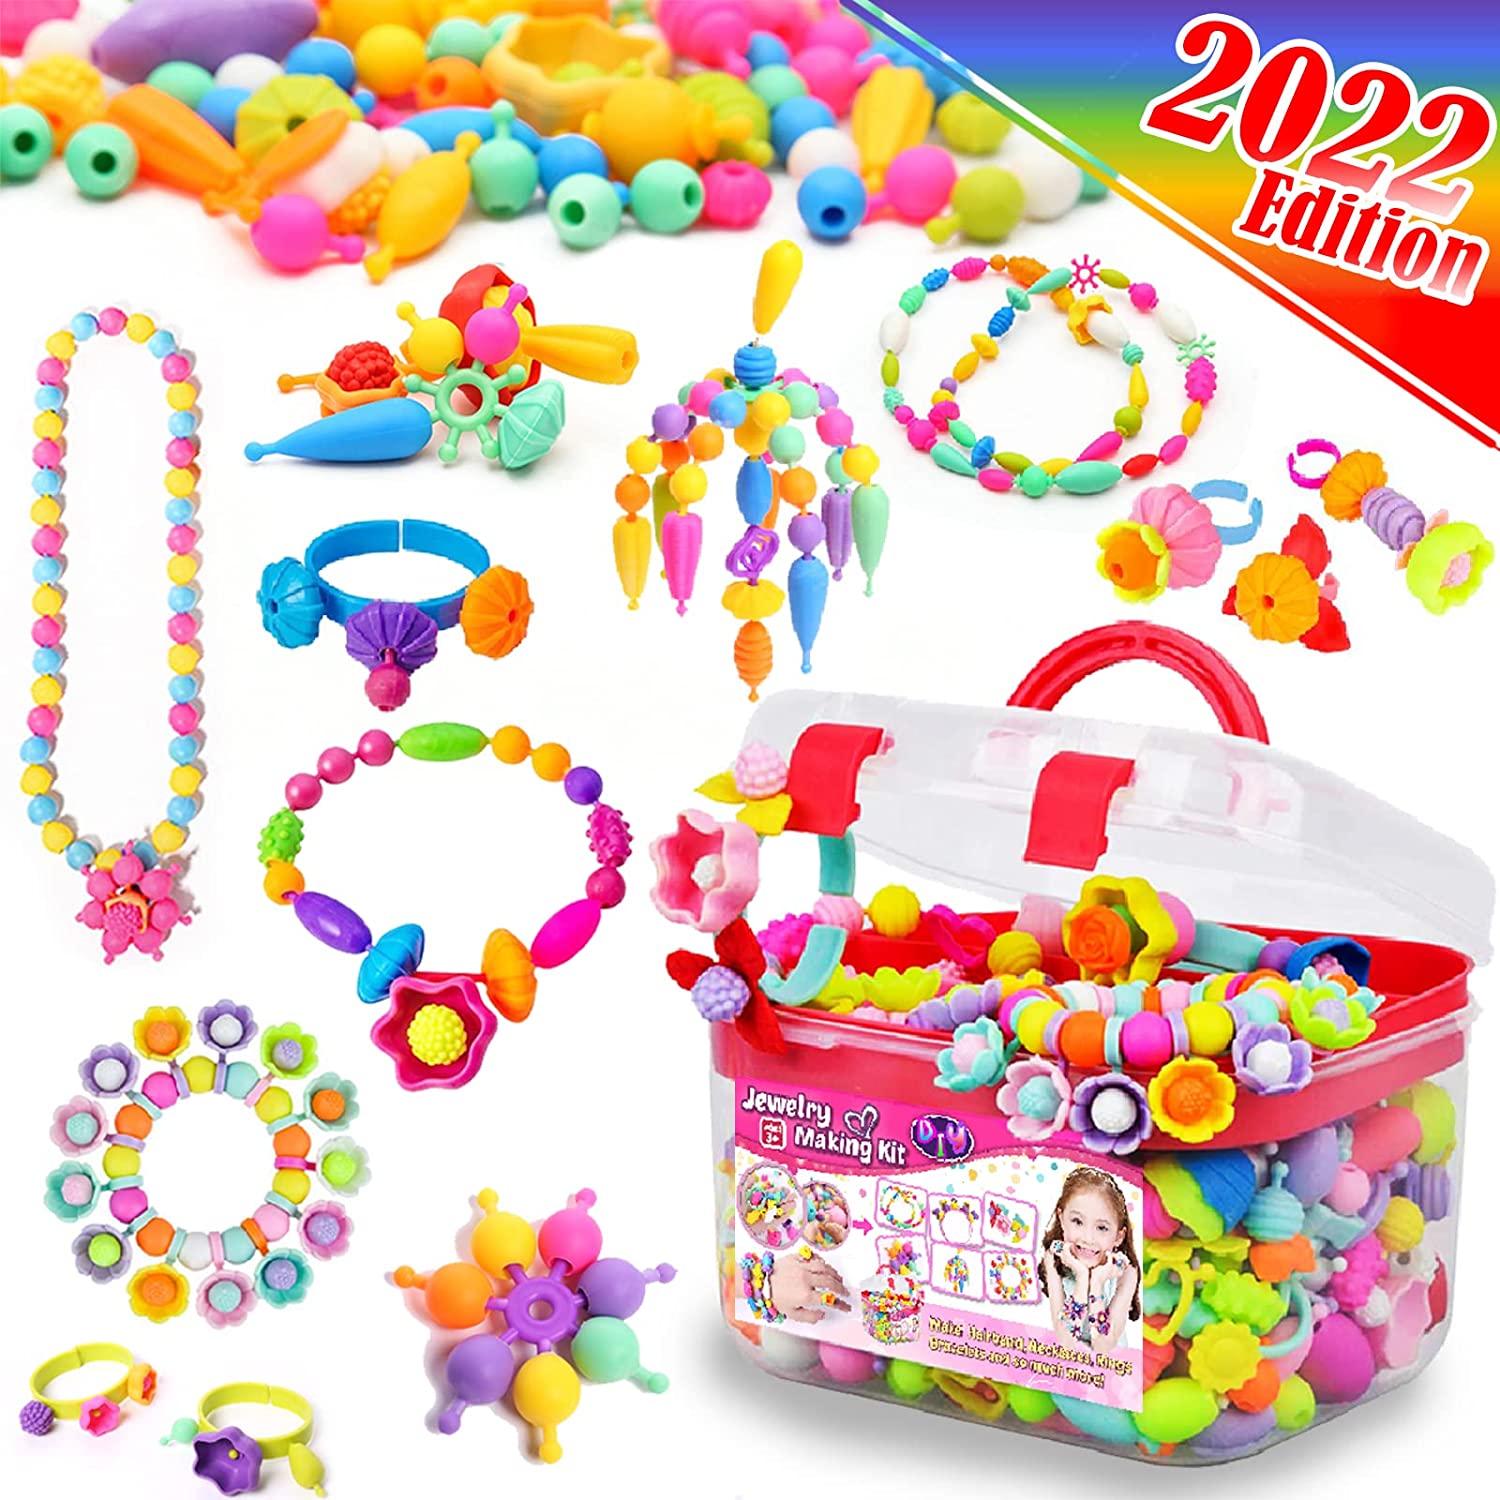 Ideal Christmas Birthday Gifts 5 Hairband Necklace Bracelet and Ring Creativity DIY Set Jewelry Making Kit 4 6 7 Year Old Kids Toys Arts and Crafts for Girls Age 3 500 PCS Pop Beads 